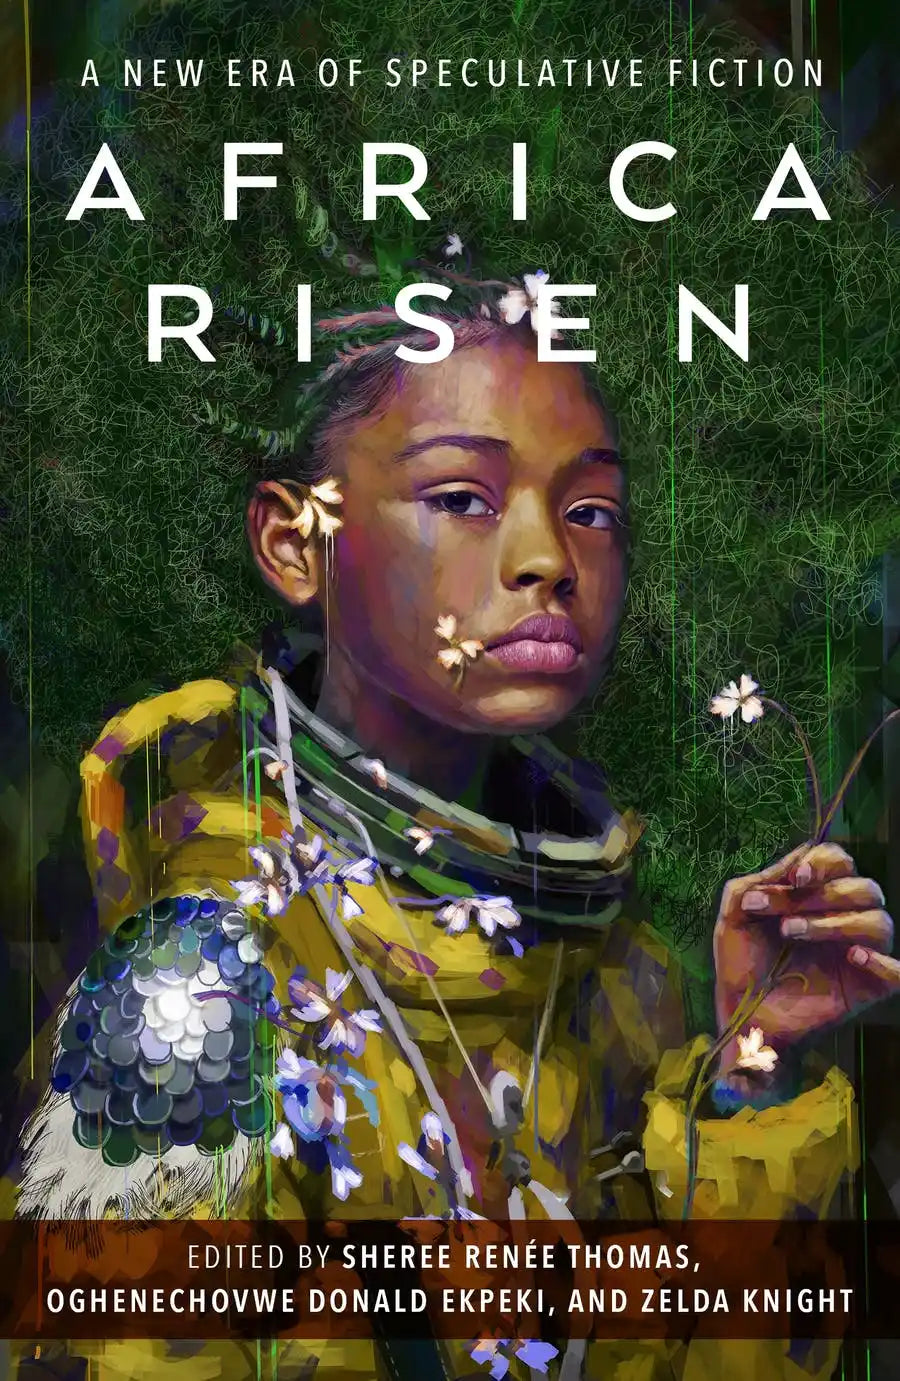 Africa Risen: A New Era of Speculative Fiction (Hardcover)